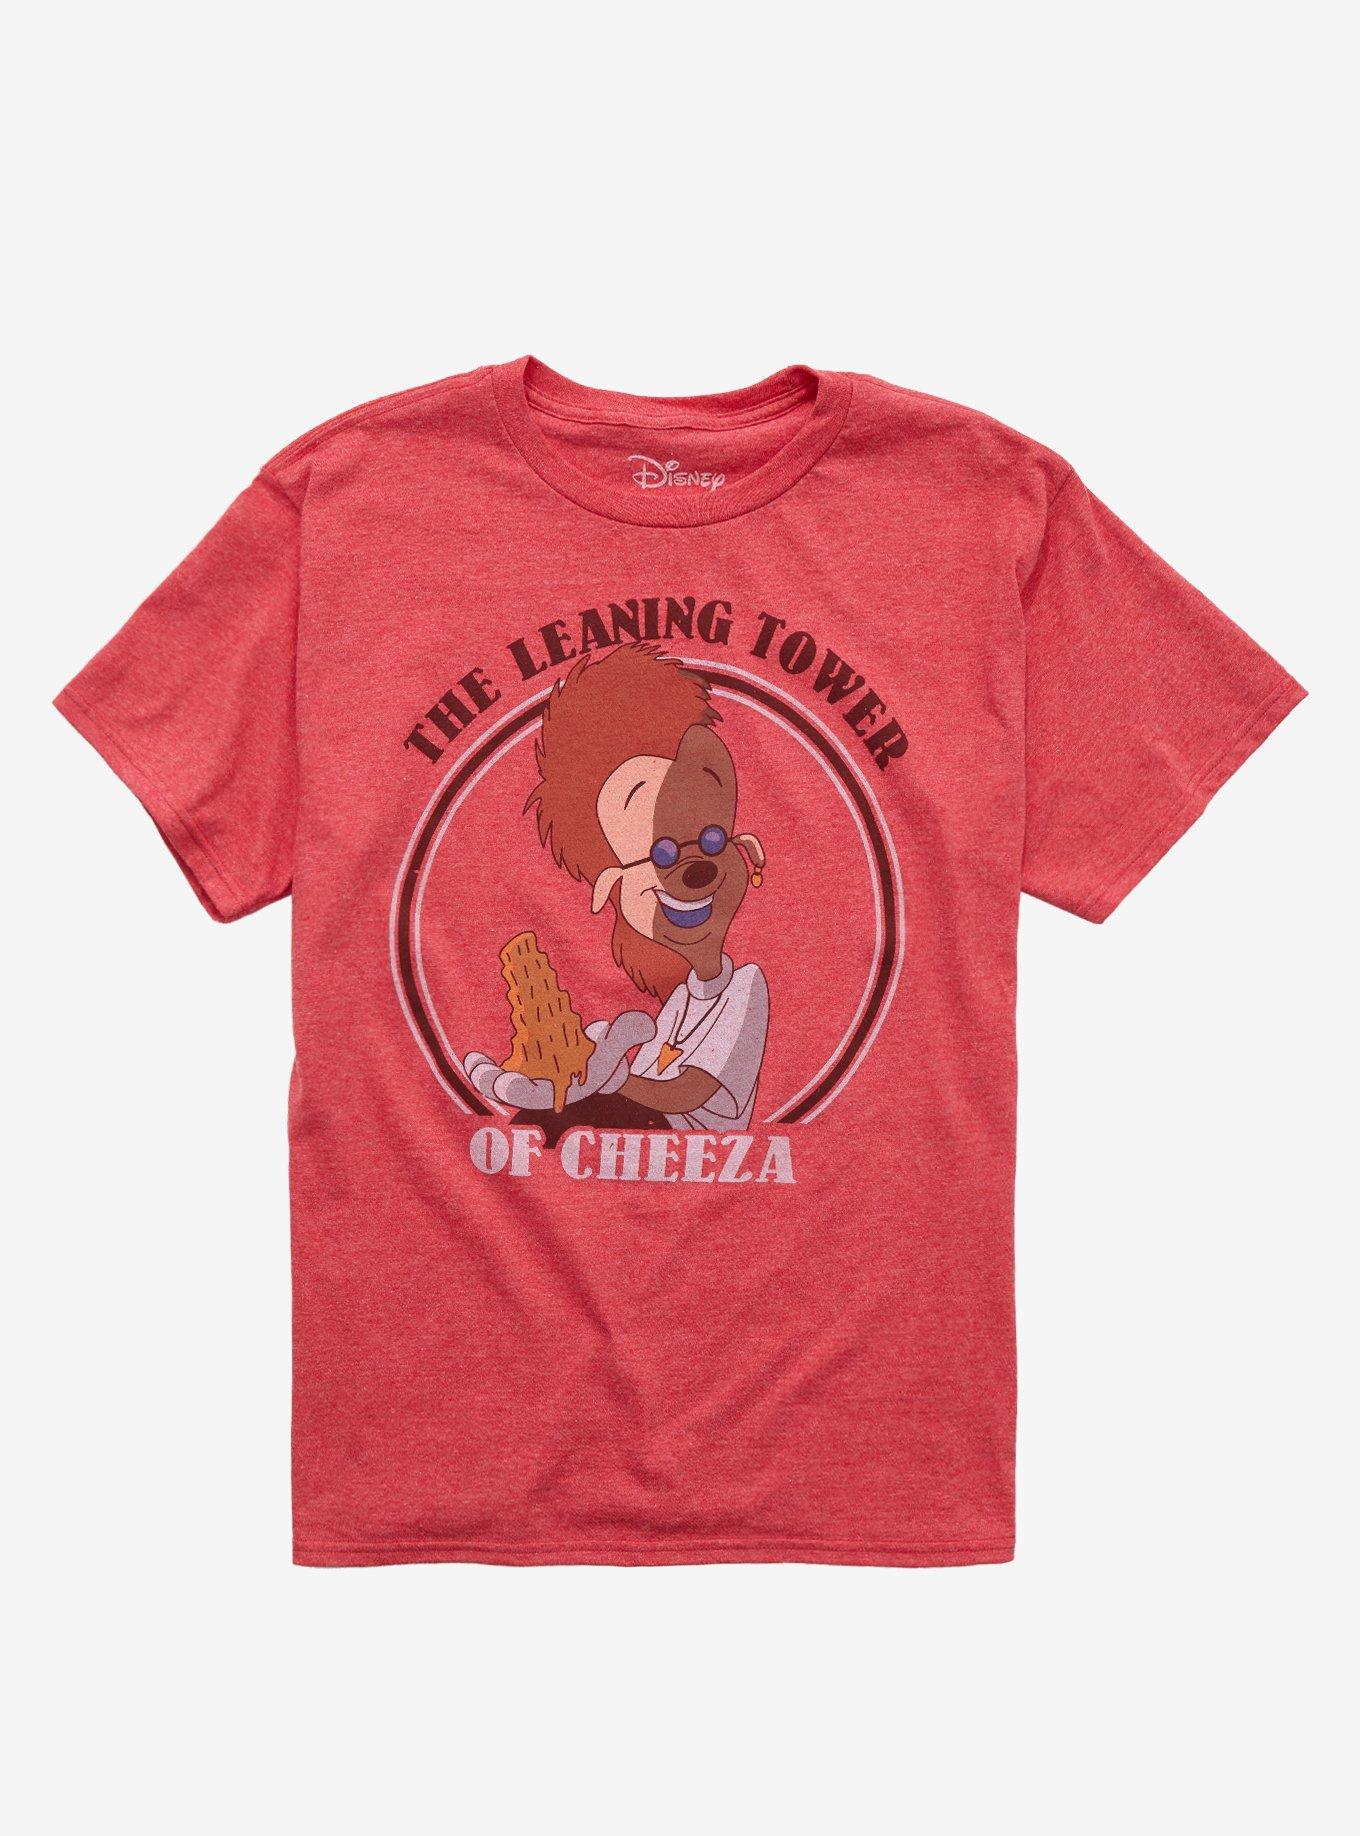 Disney A Goofy Movie The Leaning Tower Of Cheeza T-Shirt, RED, hi-res